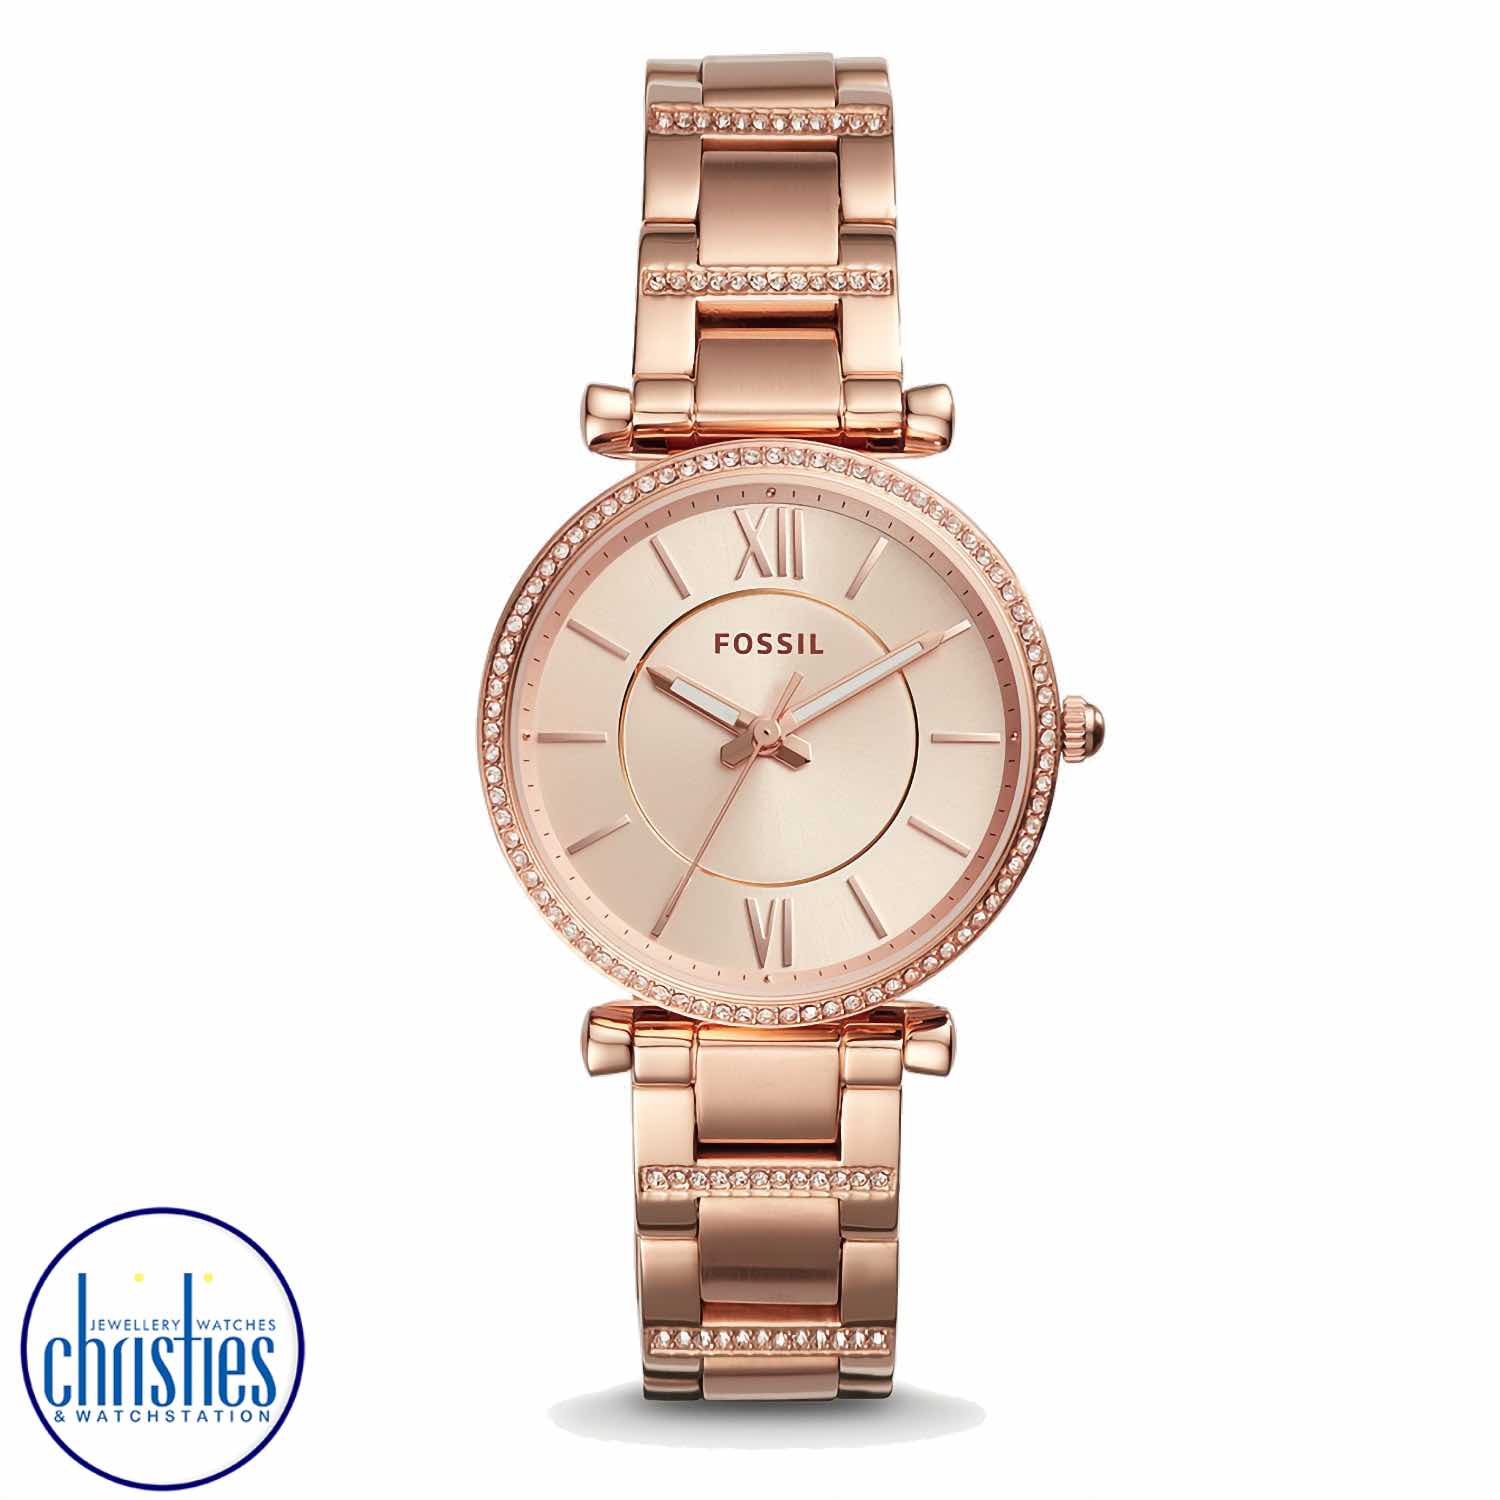 ES4301 Fossil Carlie Three-Hand Rose-Gold Tone Watch fossil smart watches nz